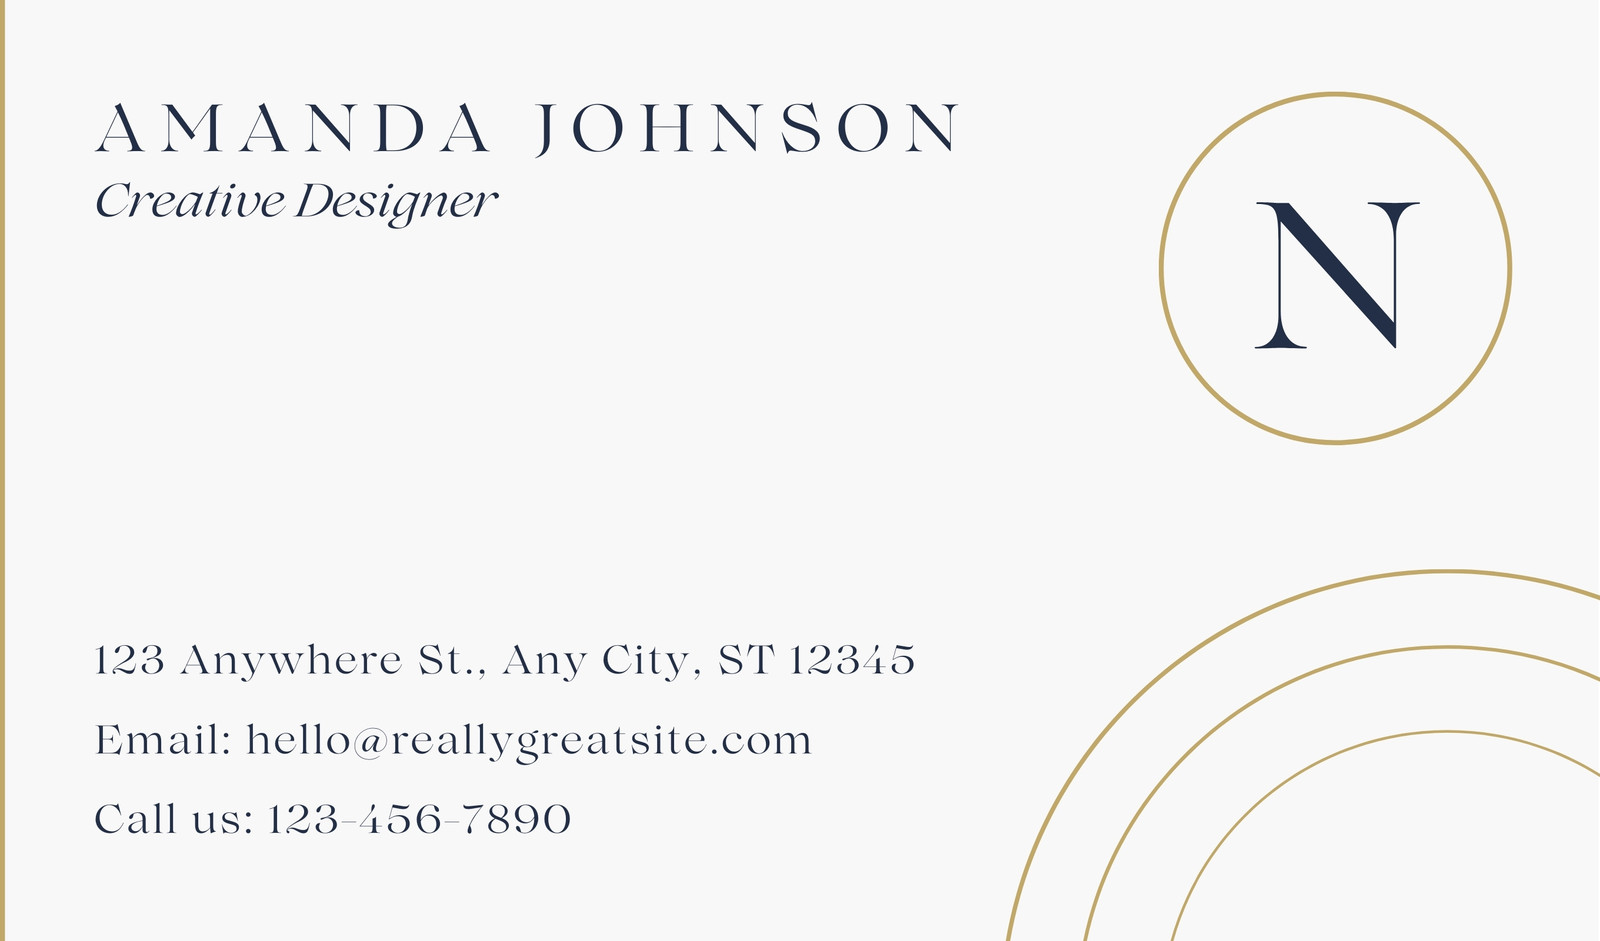 Luxury Business Card designs, themes, templates and downloadable